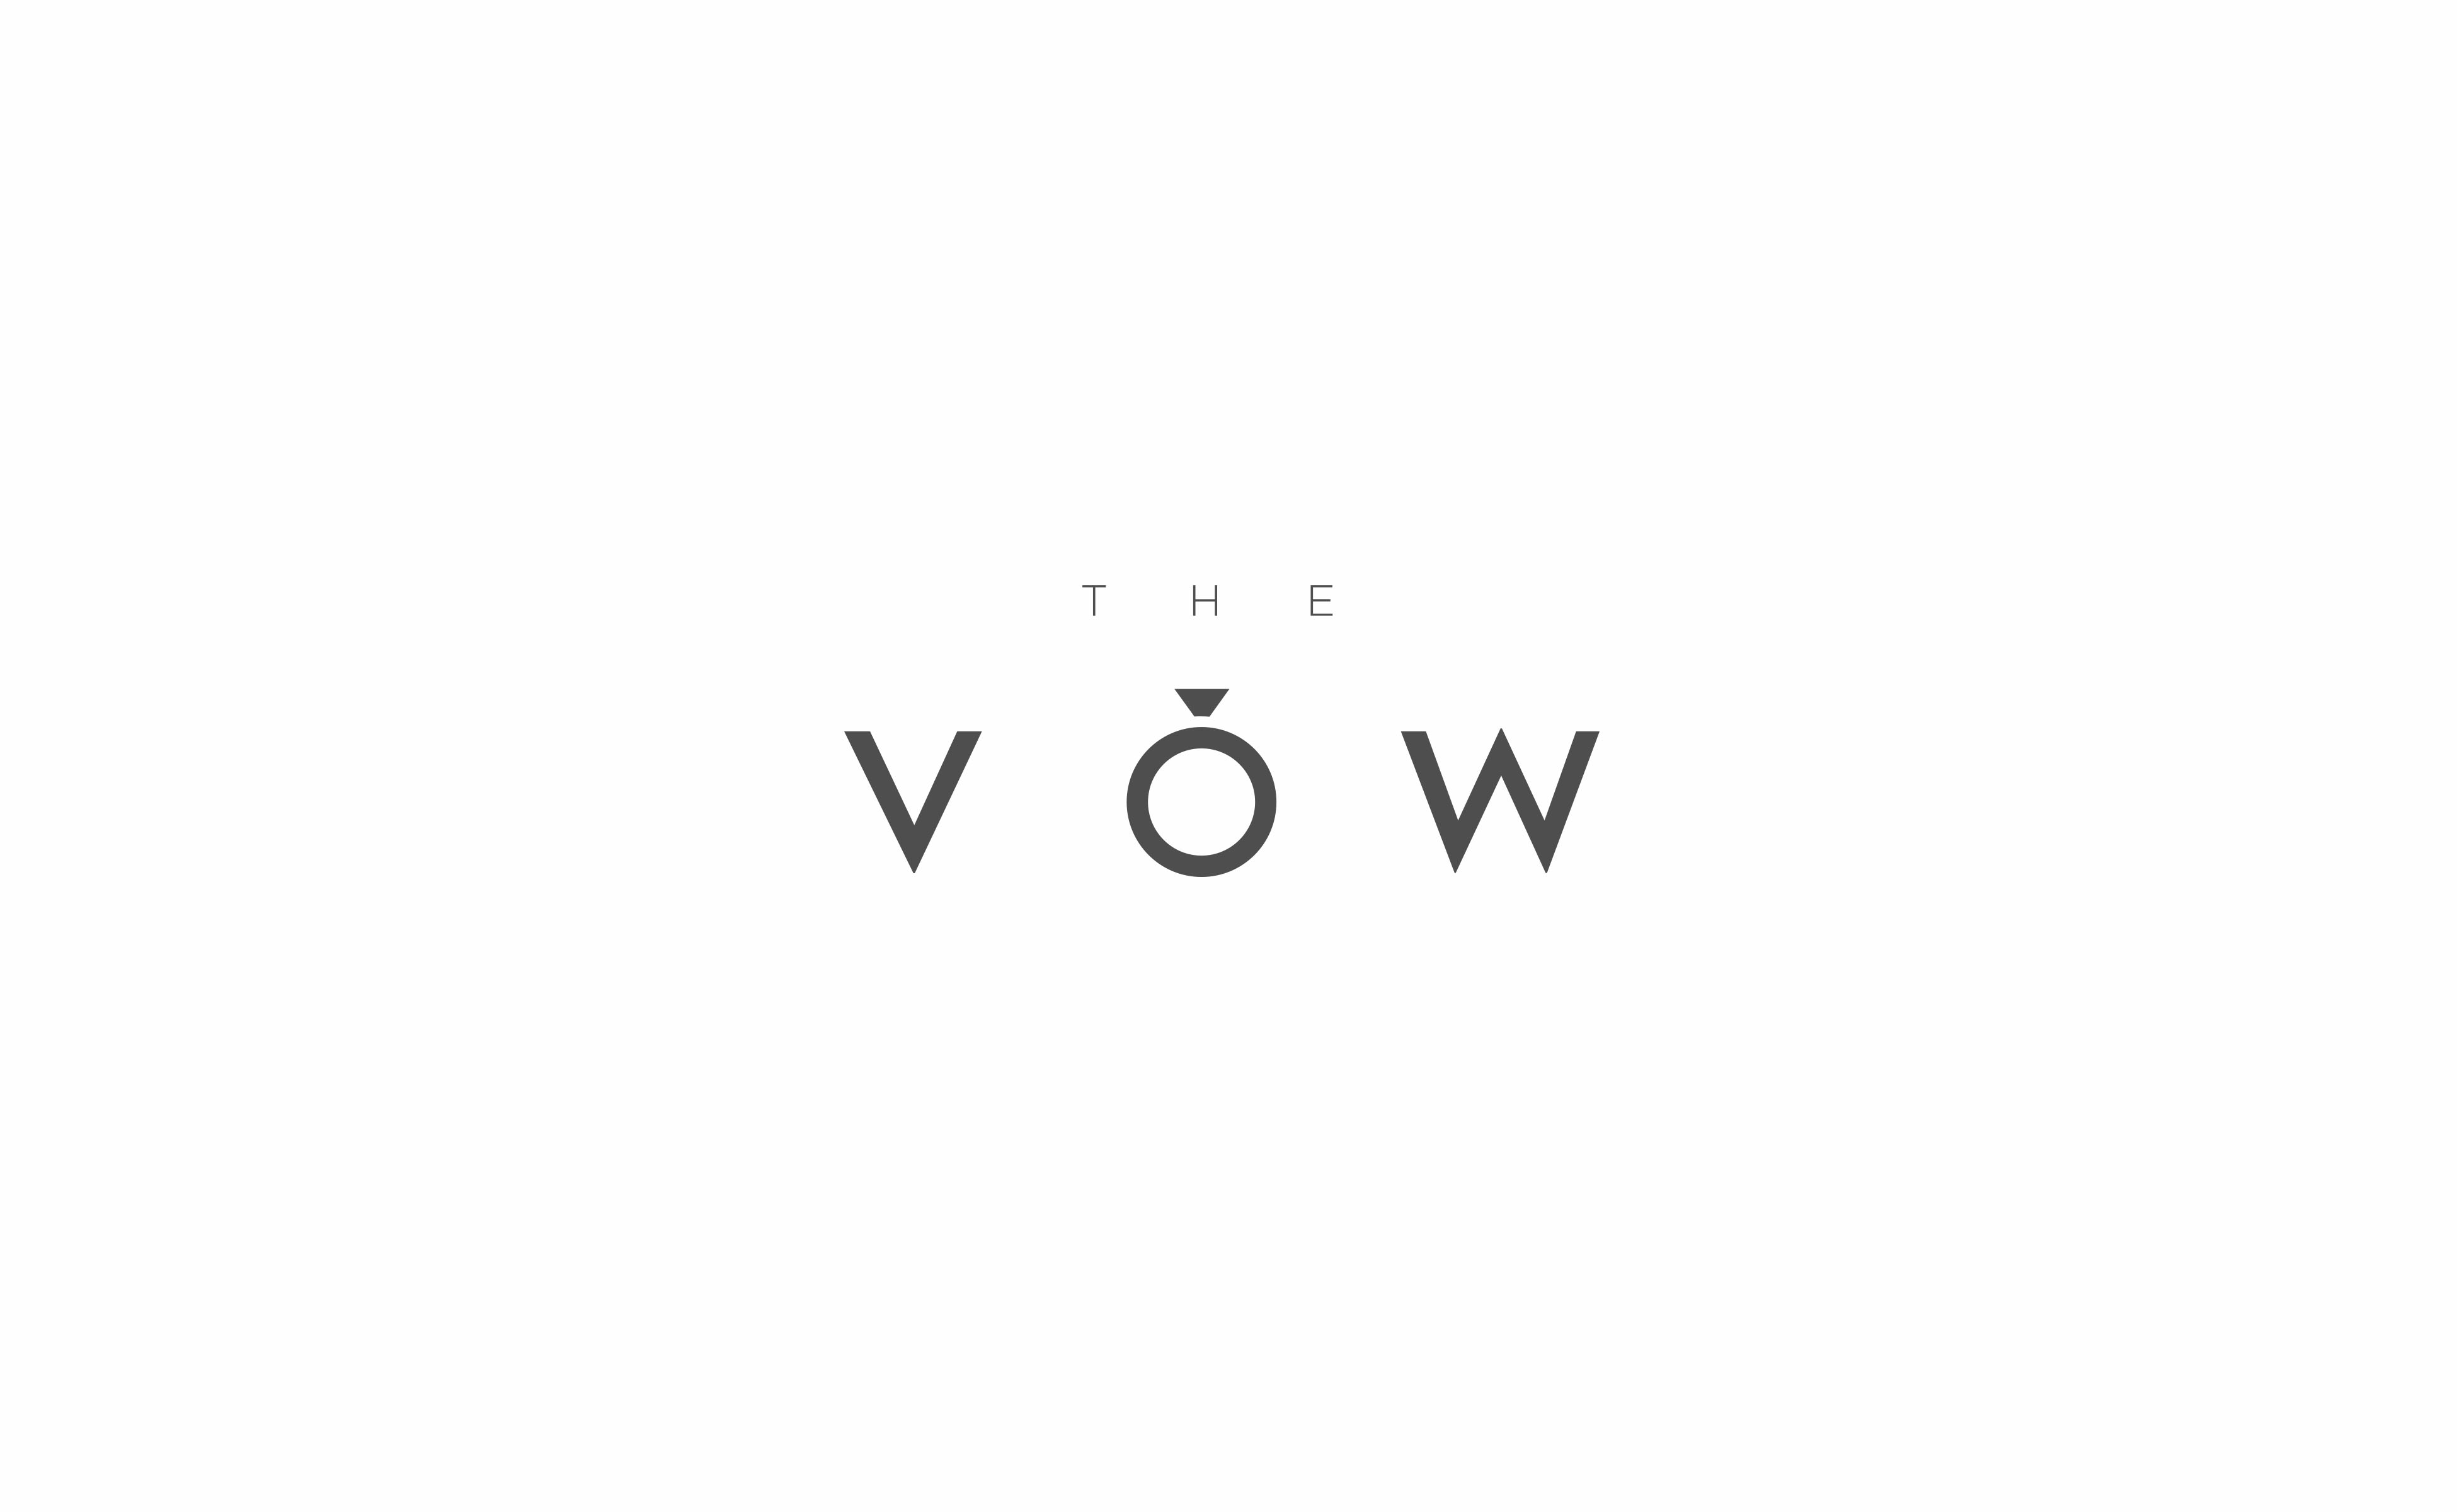 The Vow of Priority by Pastor Todd Starnes